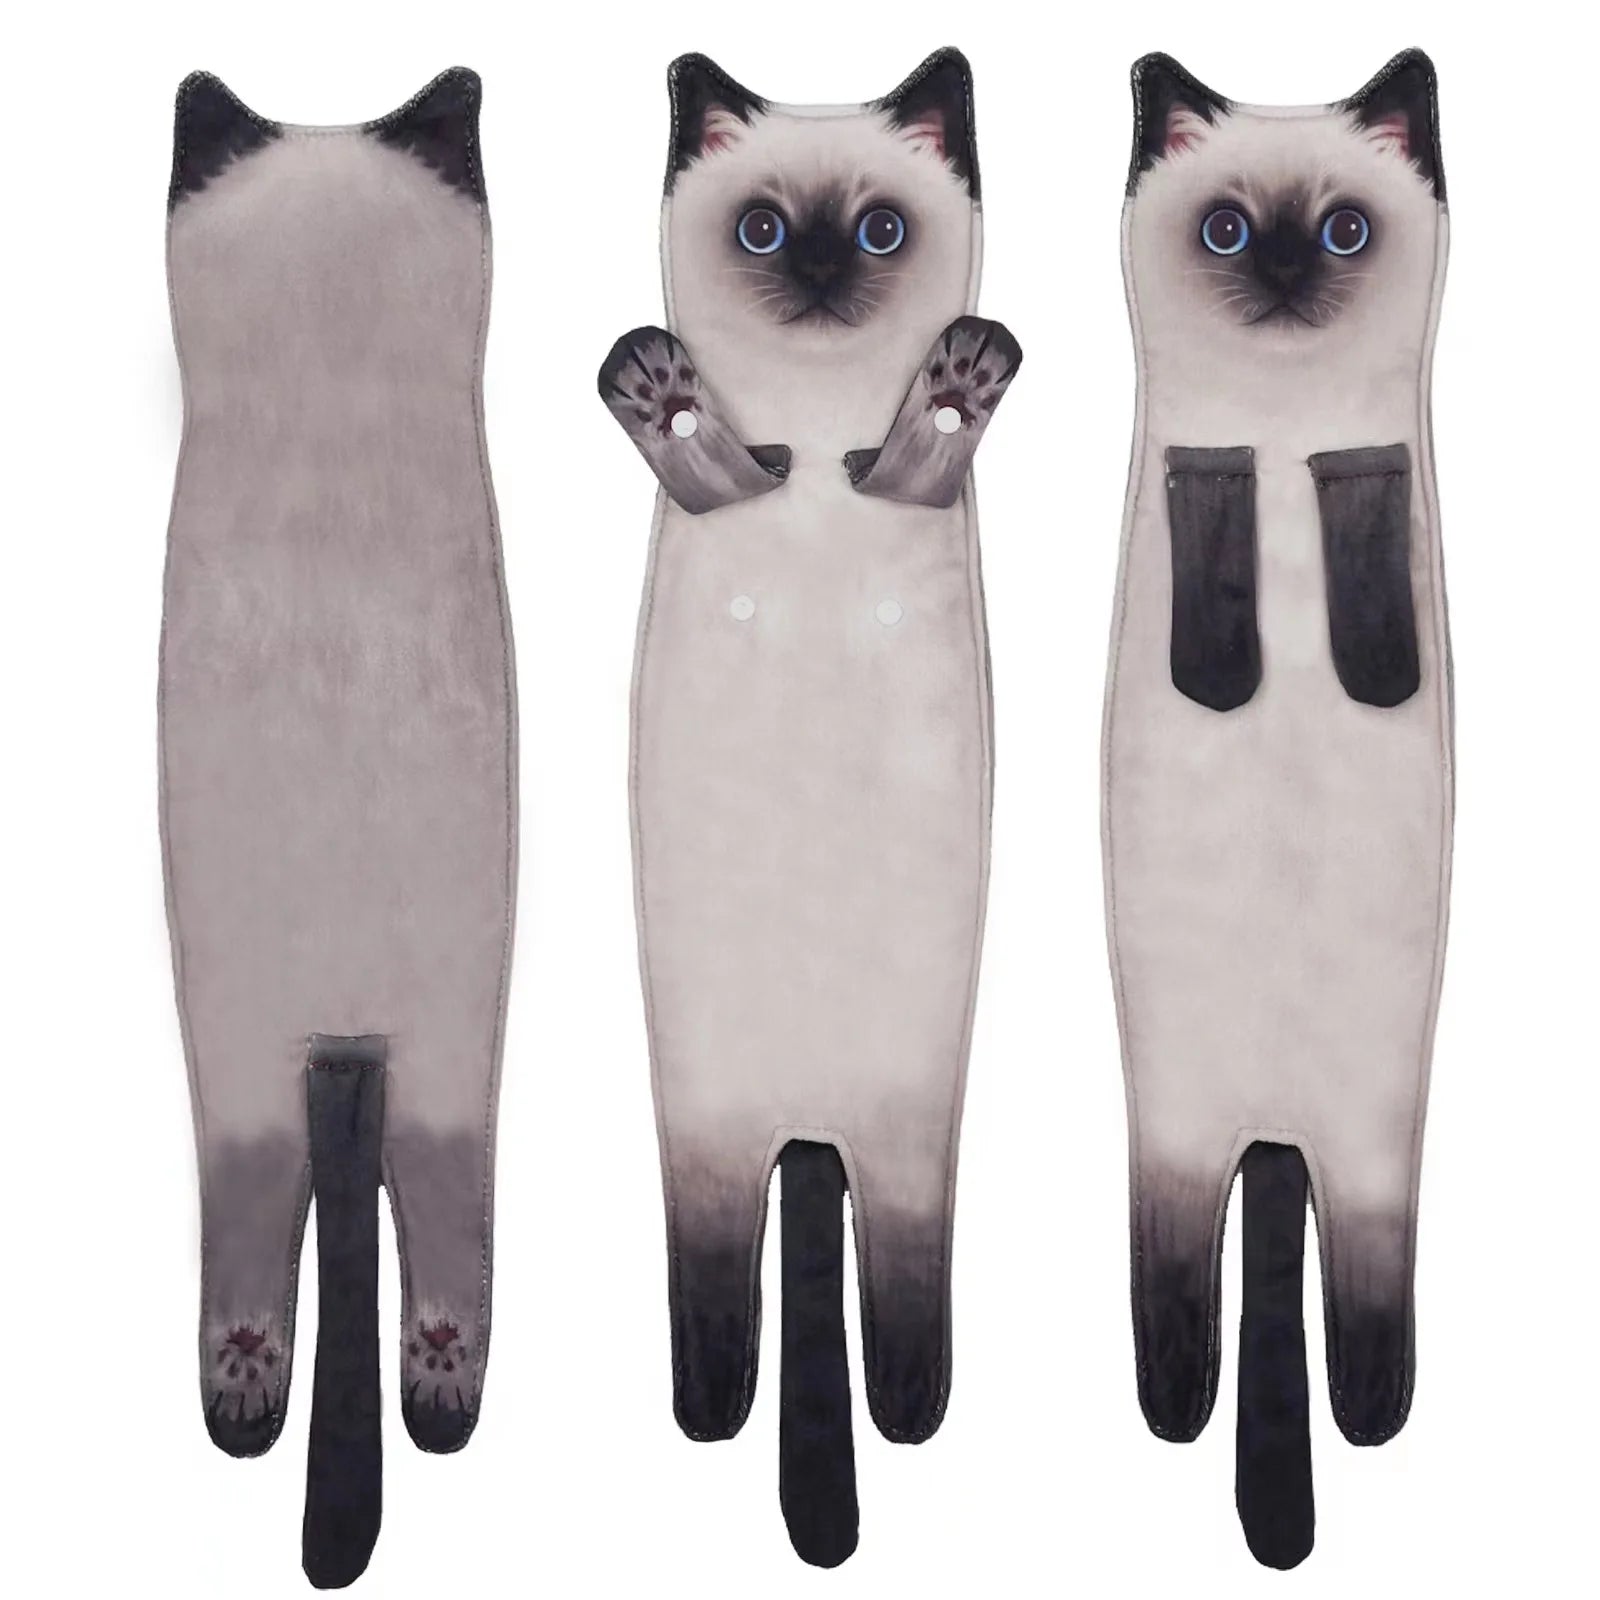 Creative and Humorous Cat-Themed Hand Towels: Soft, Absorbent, and Perfect for Your Kitchen or Bathroom - Nekoby Creative and Humorous Cat-Themed Hand Towels: Soft, Absorbent, and Perfect for Your Kitchen or Bathroom Siamese cat||14 / CHINA||200007763